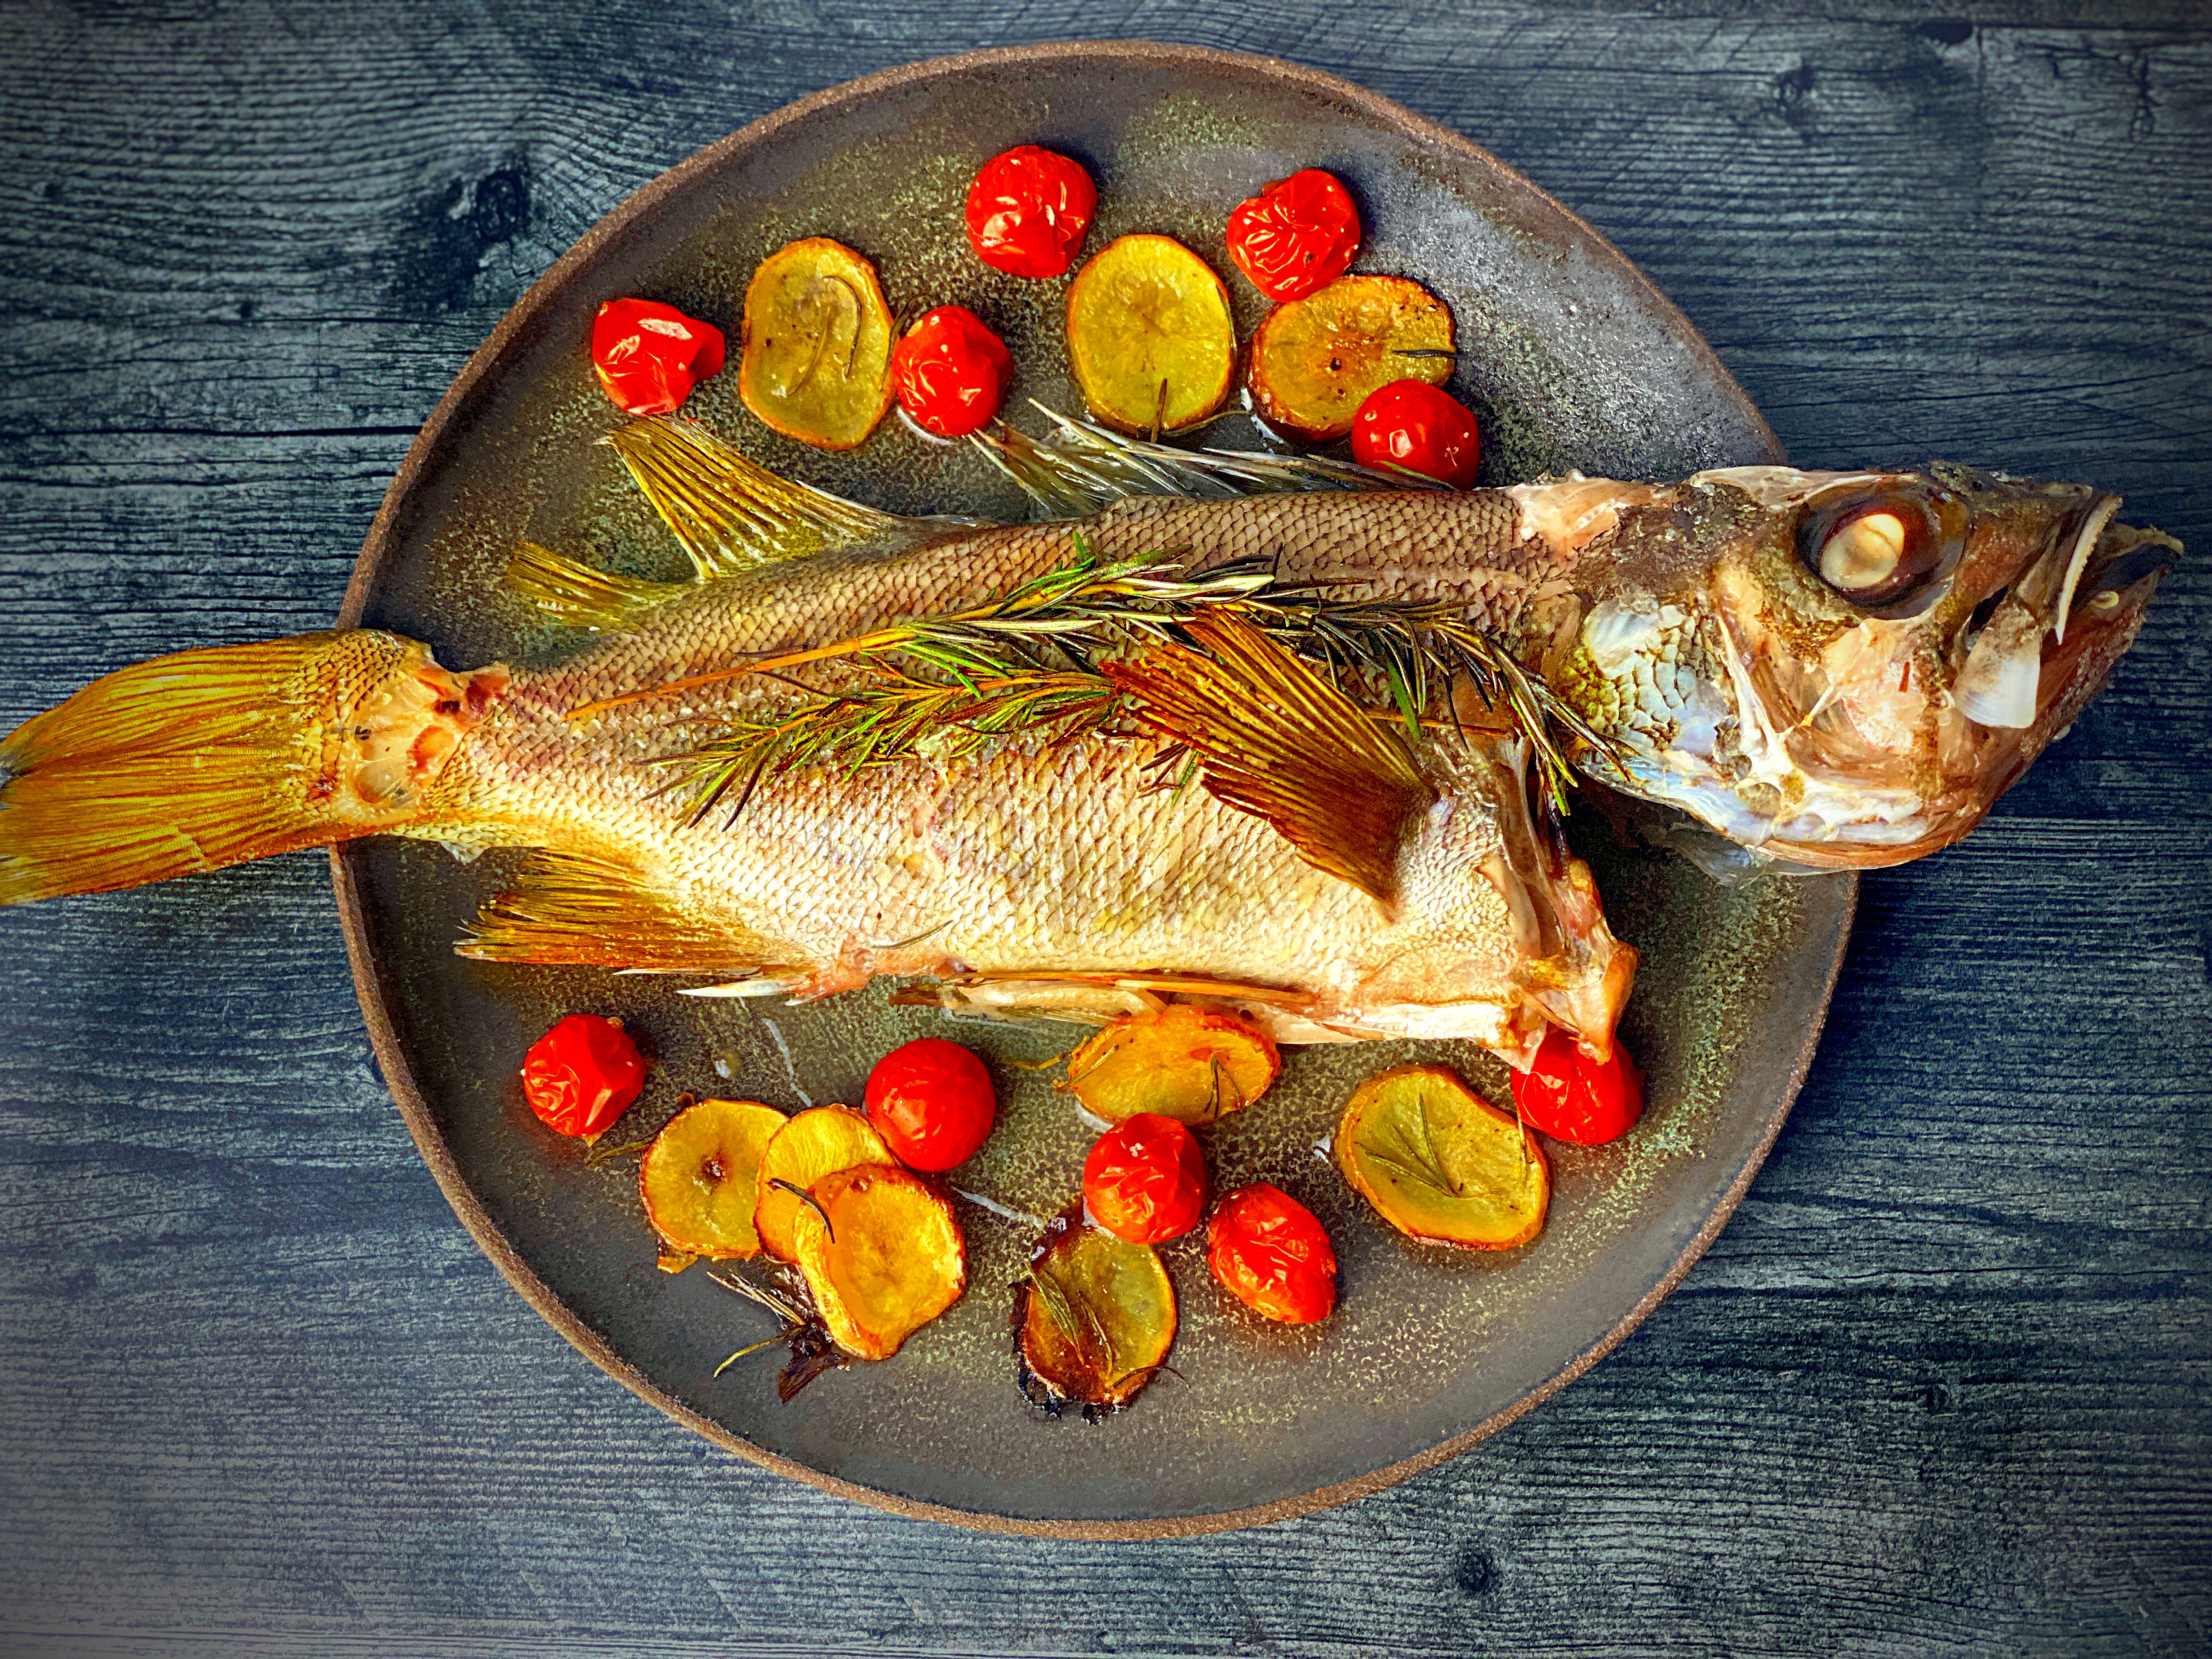 Oven Baked Yellowtail Rockfish with Crispy Potatoes and Cherry Tomatoes